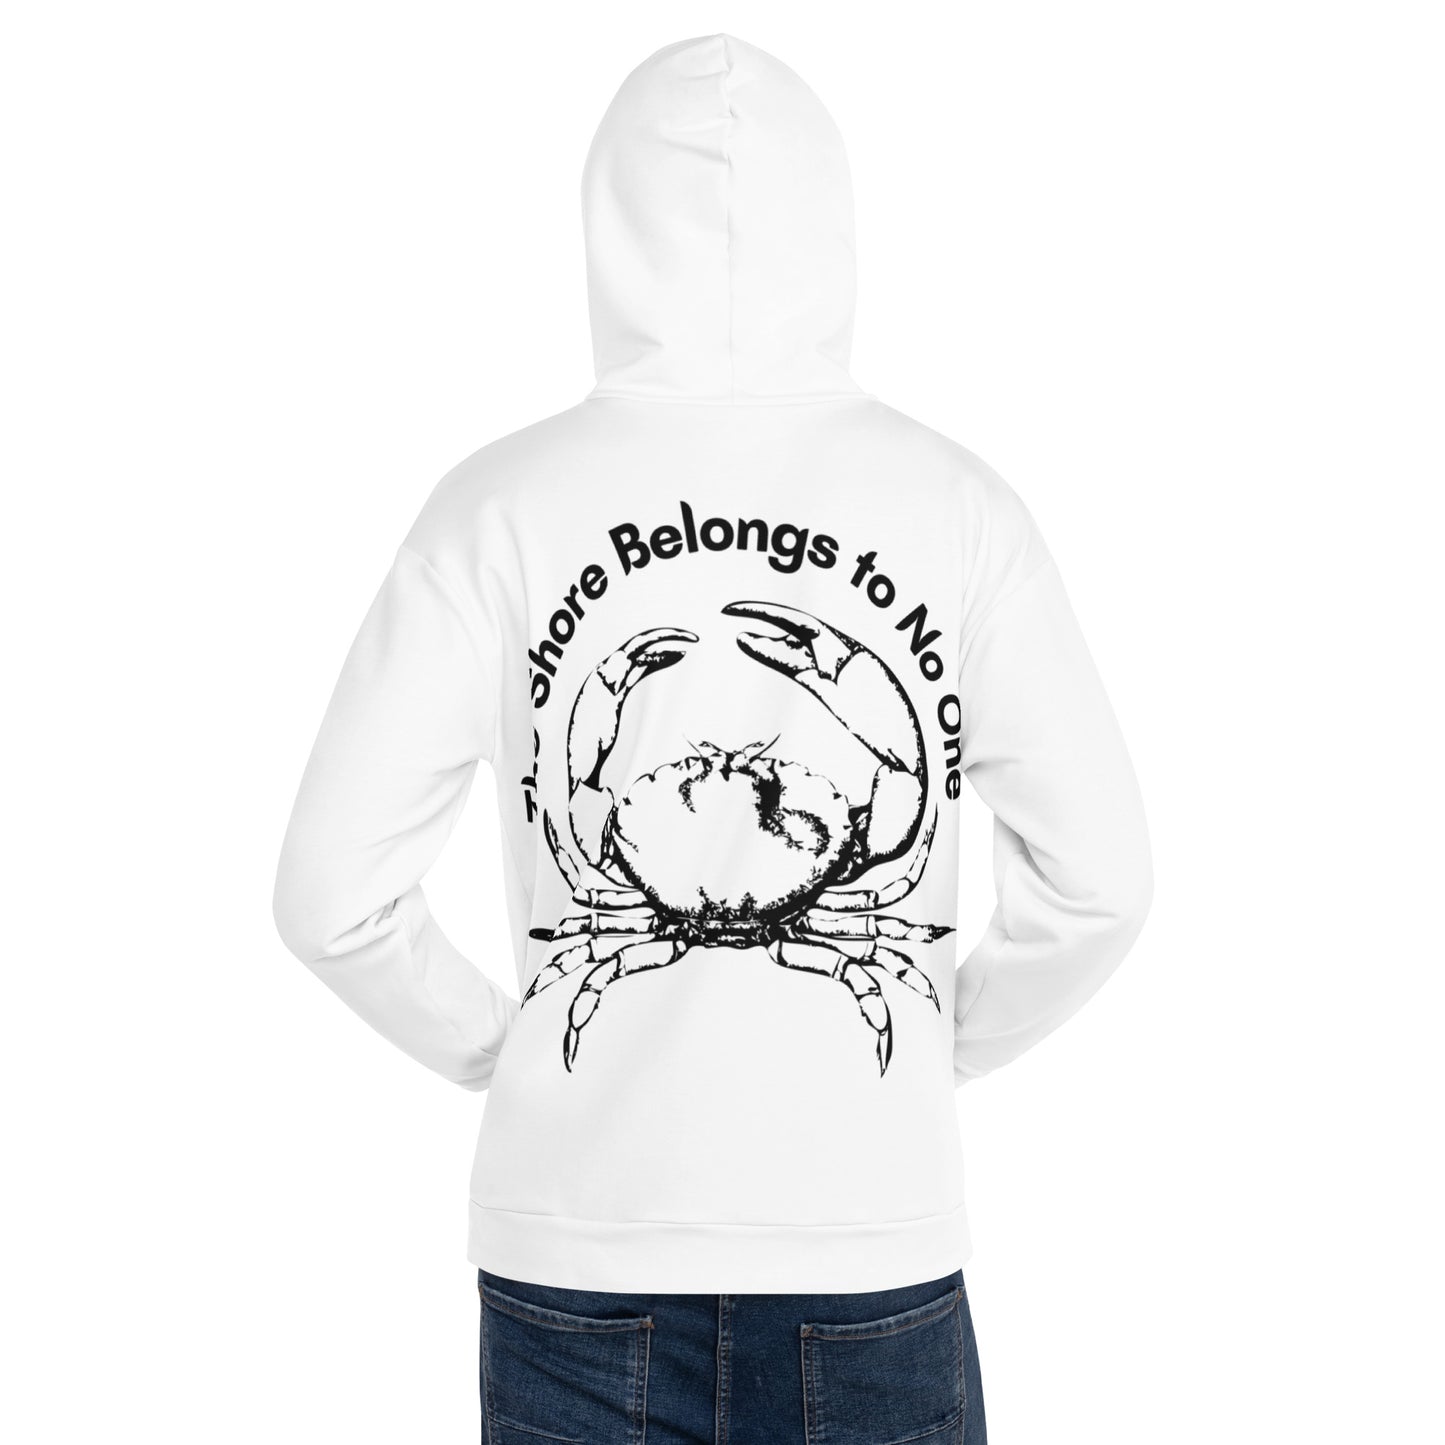 'The Shore Belongs to No One' Hoodie for Men and Women